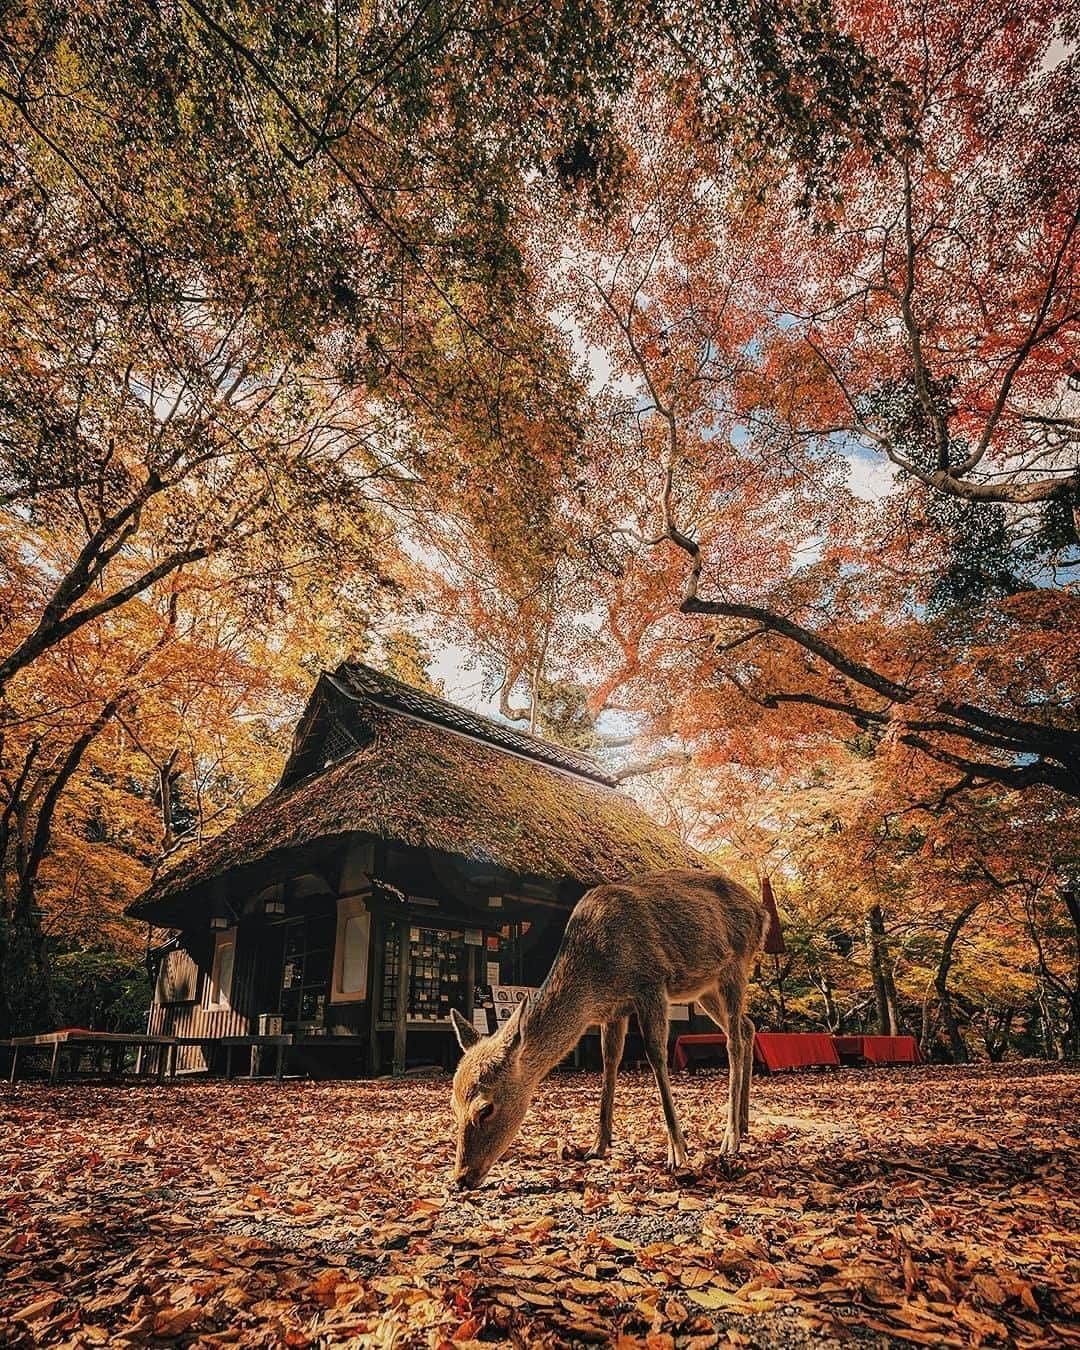 Discover Earthさんのインスタグラム写真 - (Discover EarthInstagram)「Which picture is your favourite?  "1, Nagano : It was one of hardest shoot I've ever done. I'm glad I didn't give up until I took this picture. 2, Kyoto : Beautiful carp and autumn leaves. I've always wanted to take pictures like these. 3, Nagano : With the help of Ms. Matsushita, who is handing down the good old days of Japanese life style, Thank you for your support! 4, Nara :There was one deer, so I brought it in. She was the best model, I was able to take some good pictures with you lady. 5, Izumo : The weather was very bad like storm, but I was able to take some moody pictures. 6, Nagano : Luckily, I had a deer family in my photo. But My friend @yuma1983 couldn't take pictures of the deer because he was smoking and they were leaving😂 7, Hokaido : The modern and very cool Big Buddha, designed by Tadao Ando. 8, Mt. Fuji : I wasn't able to reserve a window seat, but by chance there happened to be one available and I was able to take this picture! Super lucky! 9, Kyoto : I wanted to have a model for this scene, so I asked @nachan.b , who happened to be there. The rain had just stopped and I was able to take some good pictures. 10, Ishigaki Island : Beautiful morning glow captured by my friend @mitsuru_wakabayashi 's drone."  🇯🇵 #discoverjapan with @tokio_kid  . . . . #tokyo  #日本  #japanese  #manga  #kyoto  #osaka  #東京  #ig_japan  #写真好きな人と繋がりたい  #otaku  #igersjp  #instagramjapan  #ファインダー越しの私の世界  #team_jp_  #写真撮ってる人と繋がりたい  #일본  #tokyocameraclub  #lovers_nippon  #jdm  #夏  #icu_japan  #写真  #空  #東京カメラ部  #japanesefood  #京都  #wu_japan」1月3日 0時00分 - discoverearth